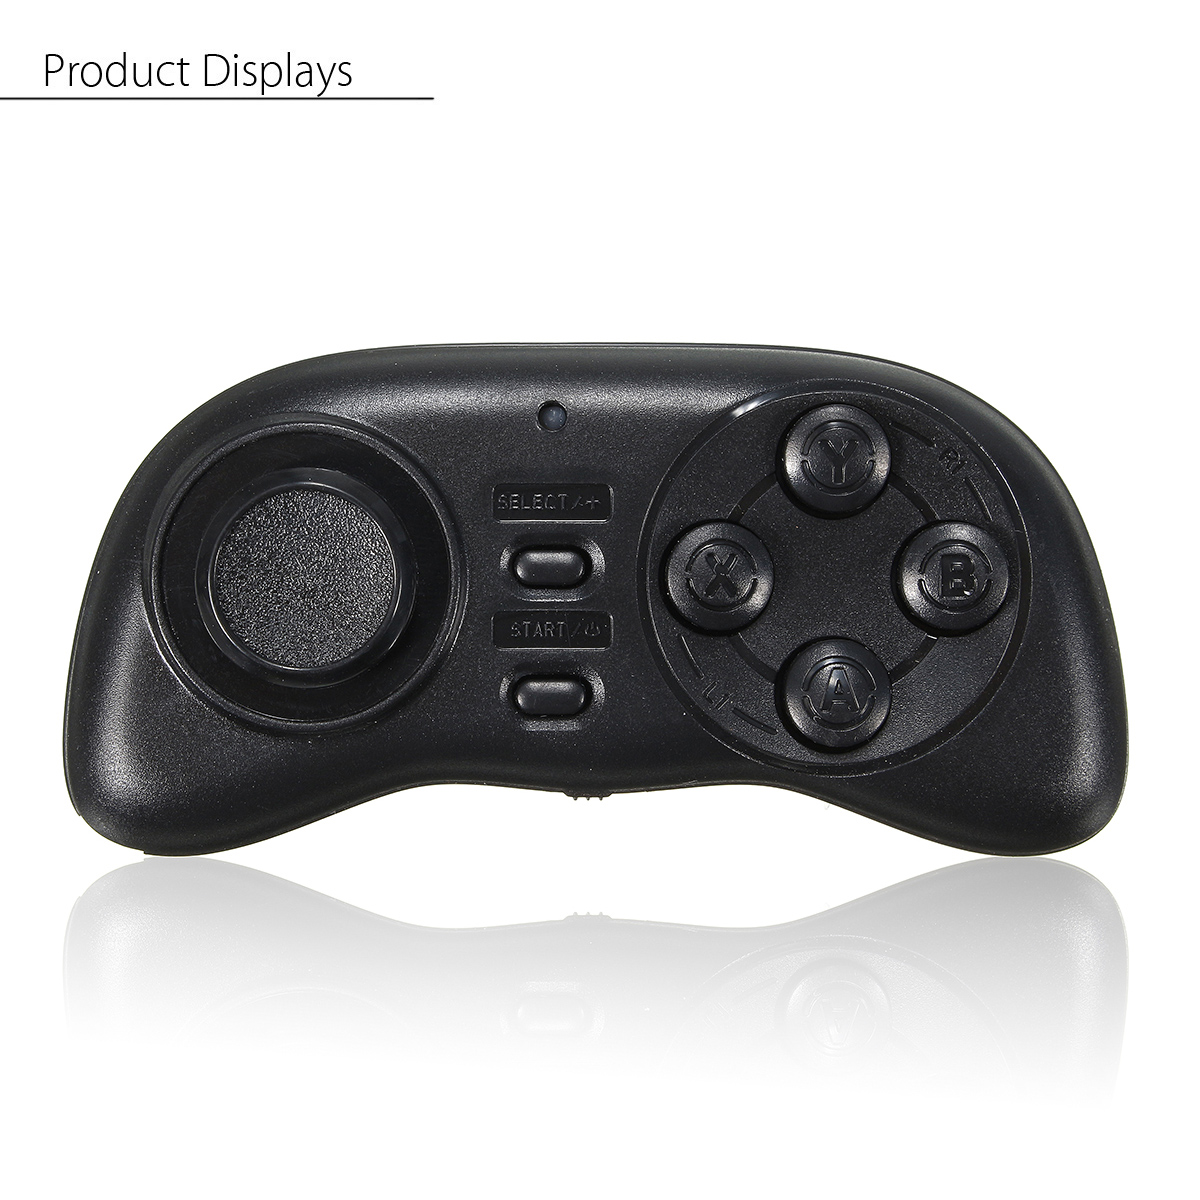 Wireless-Bluetooth-Selfie-Remote-Joystick-Gamepad-VR-Controller-for-IOS-Android-PC-TV-1128009